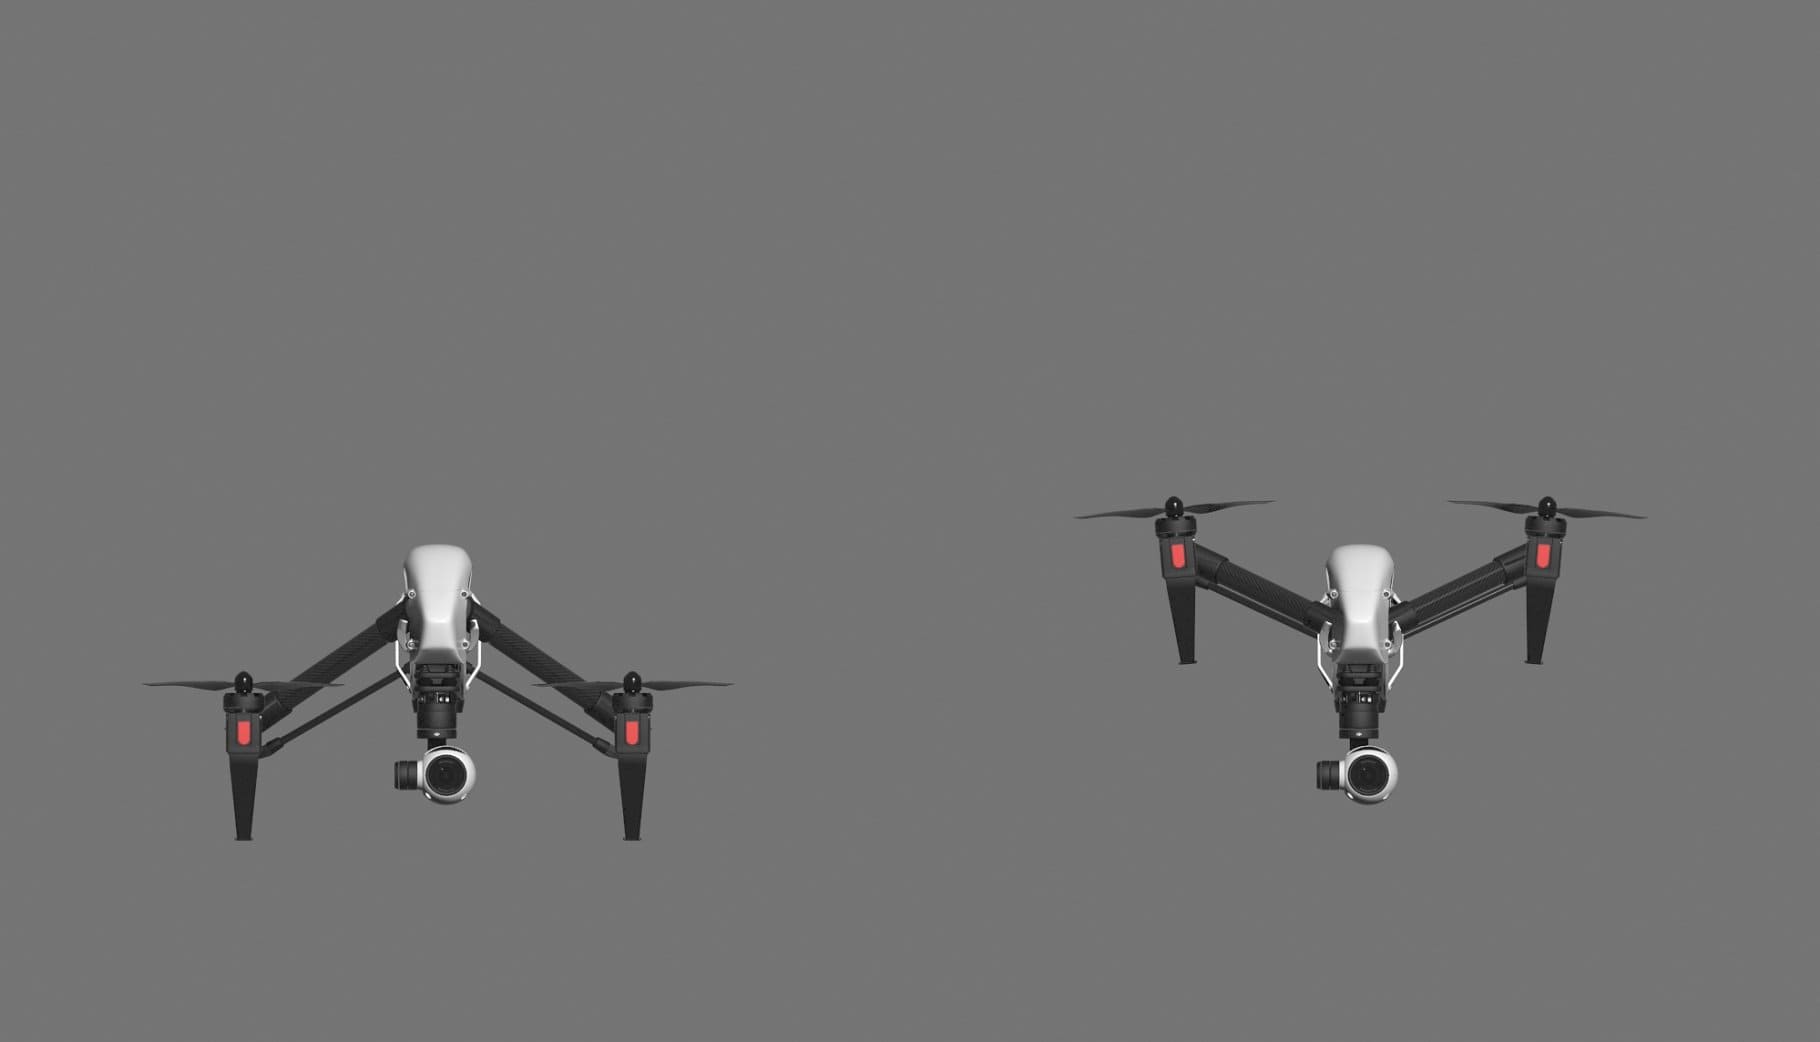 Two quadcopters are depicted on a gray background.